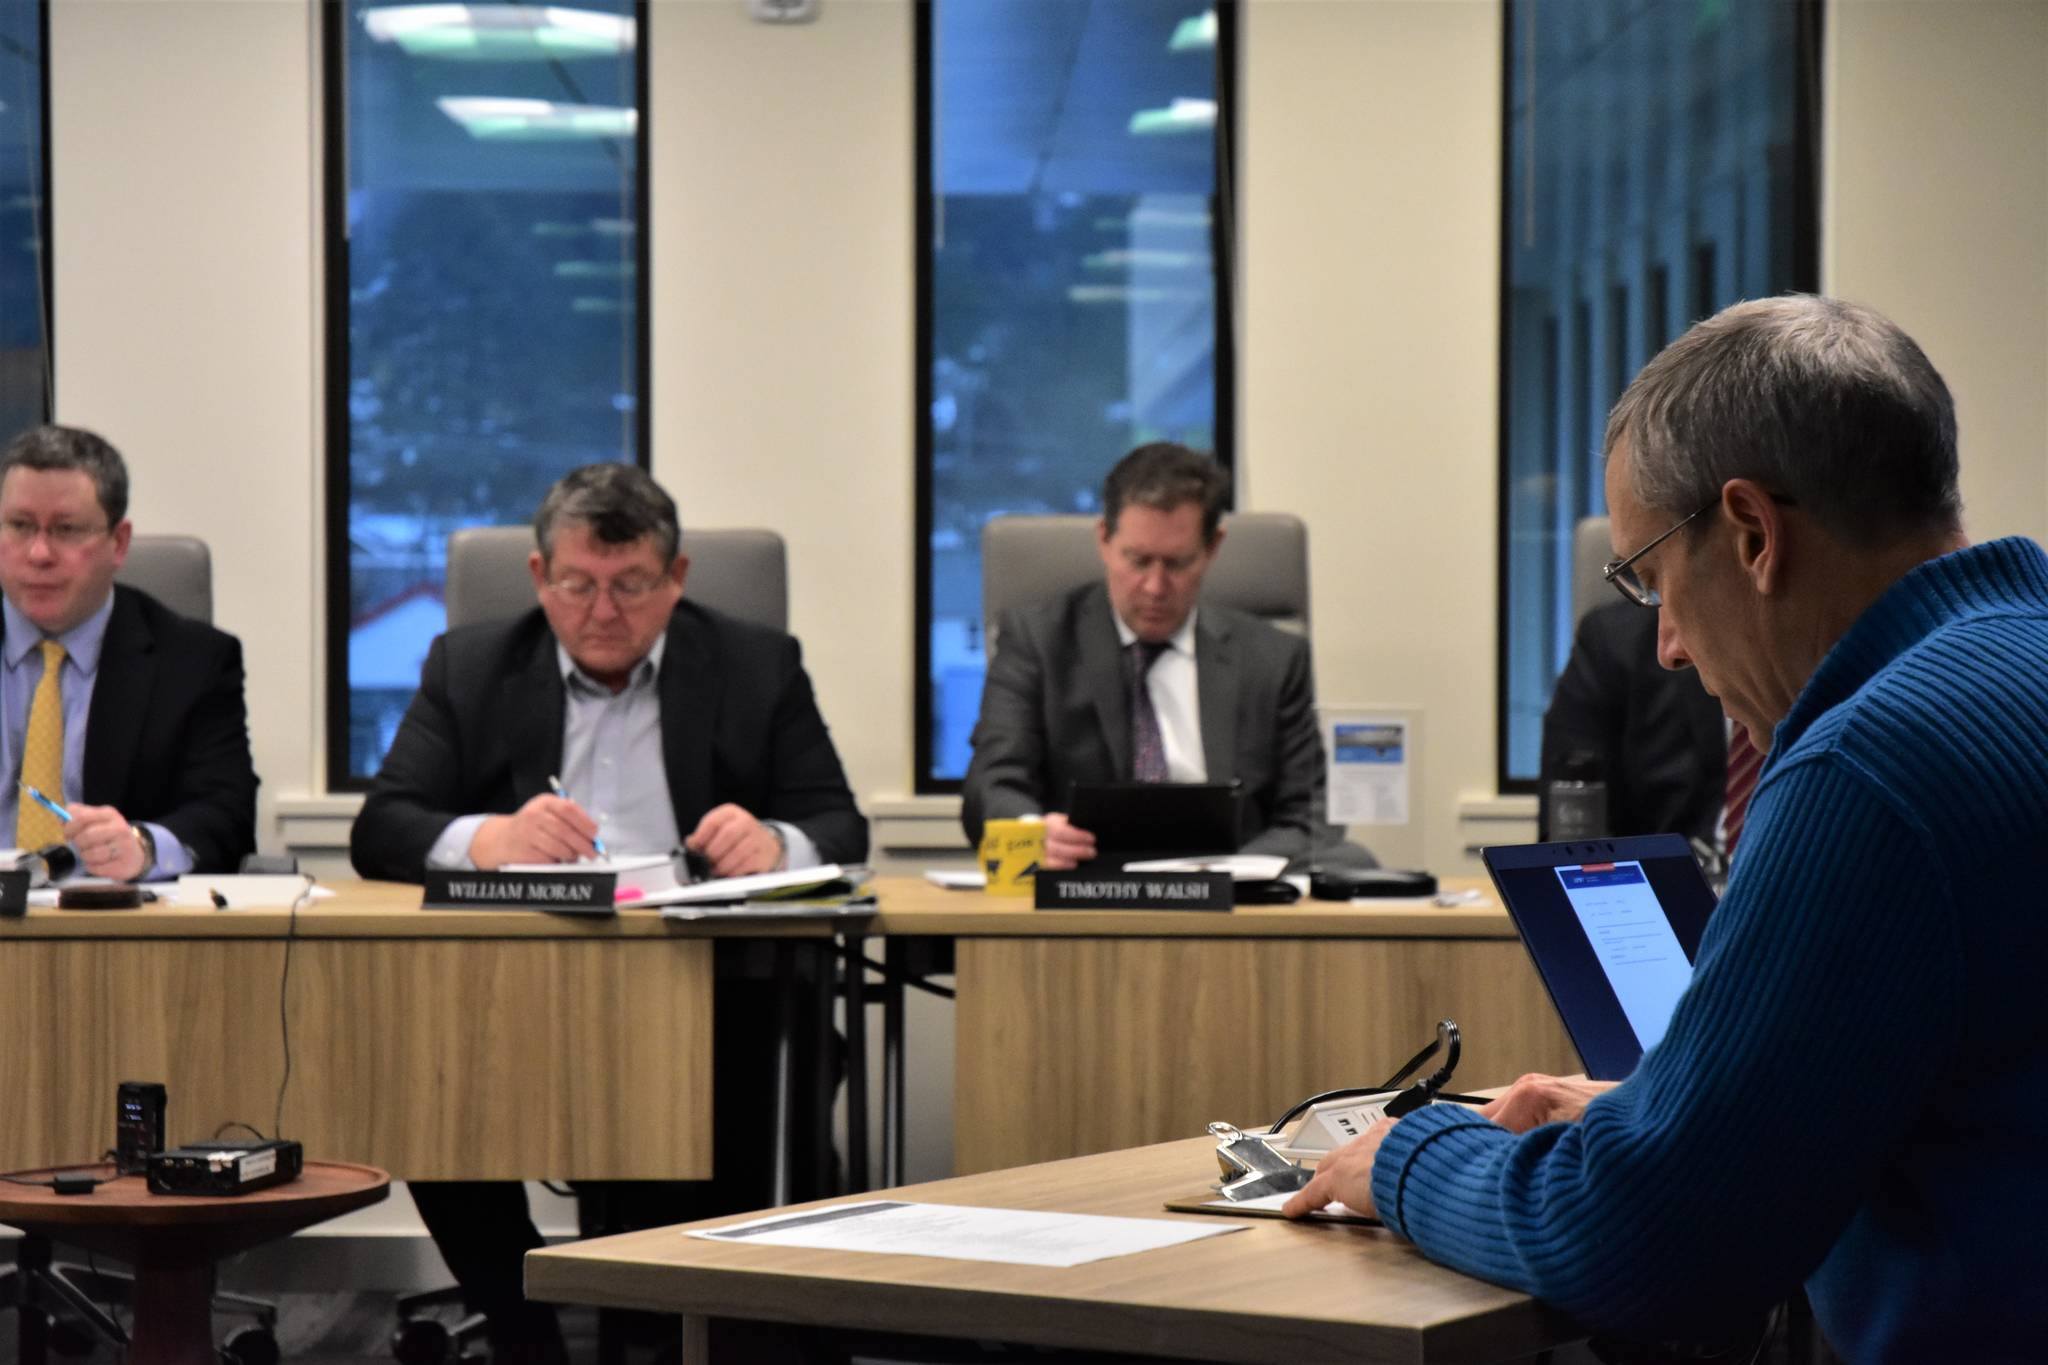 Doug Woodby, co-chair of environmental group 350Juneau, right, gives public testimony to the Alaska Permanent Fund Corporation Board of Directors at their quarterly meeting on Wednesday. (Peter Segall | Juneau Empire)